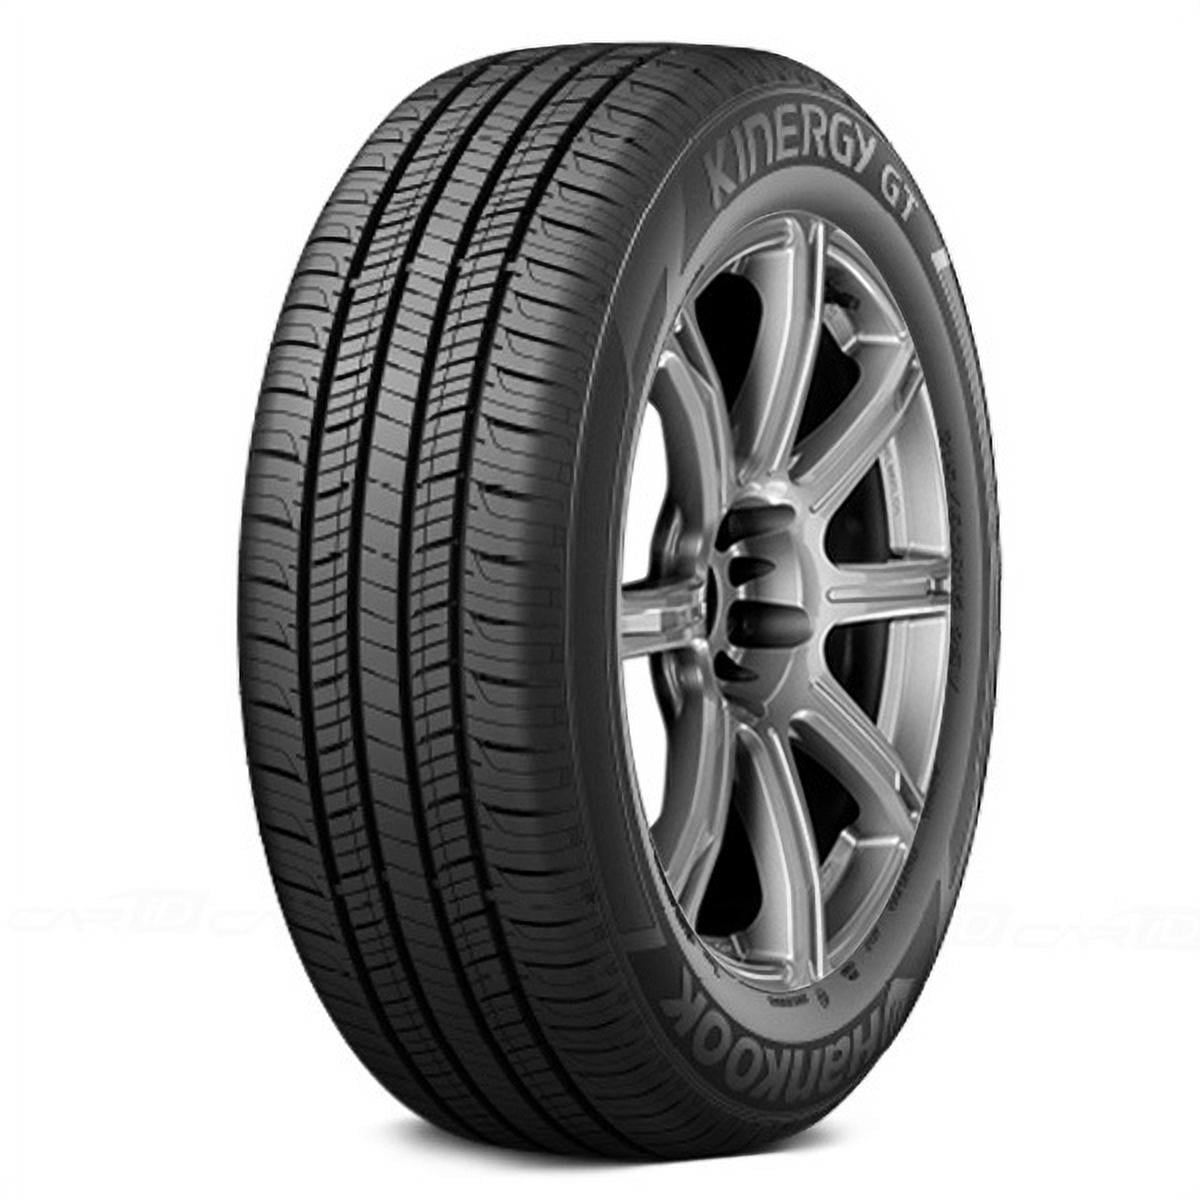 2 Tires Hankook Optimo H426 P215/60R16 94T BSW